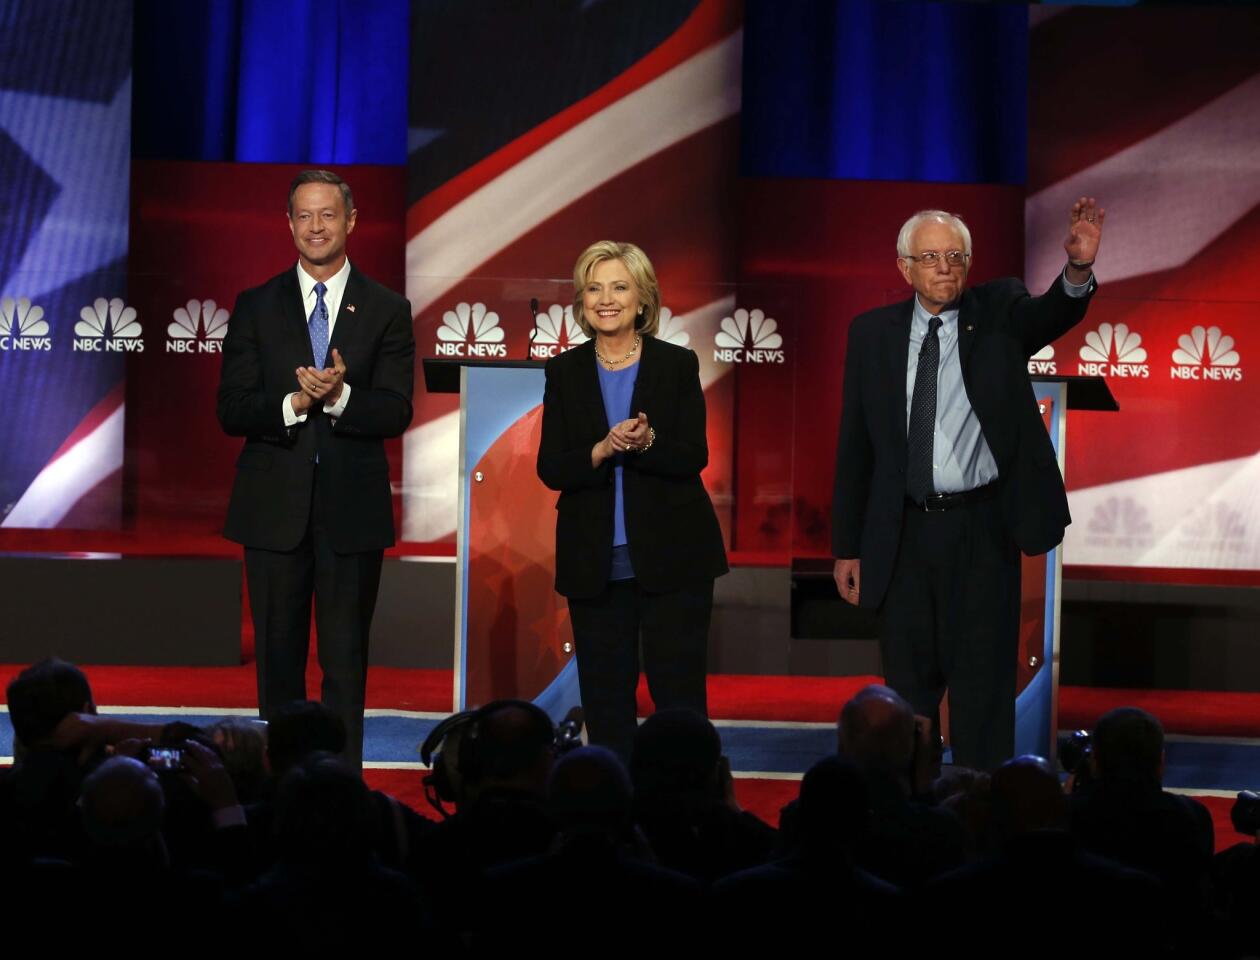 Democratic presidential candidates Martin O'Malley, left, Hillary Clinton and Bernie Sanders before their debate in South Carolina.